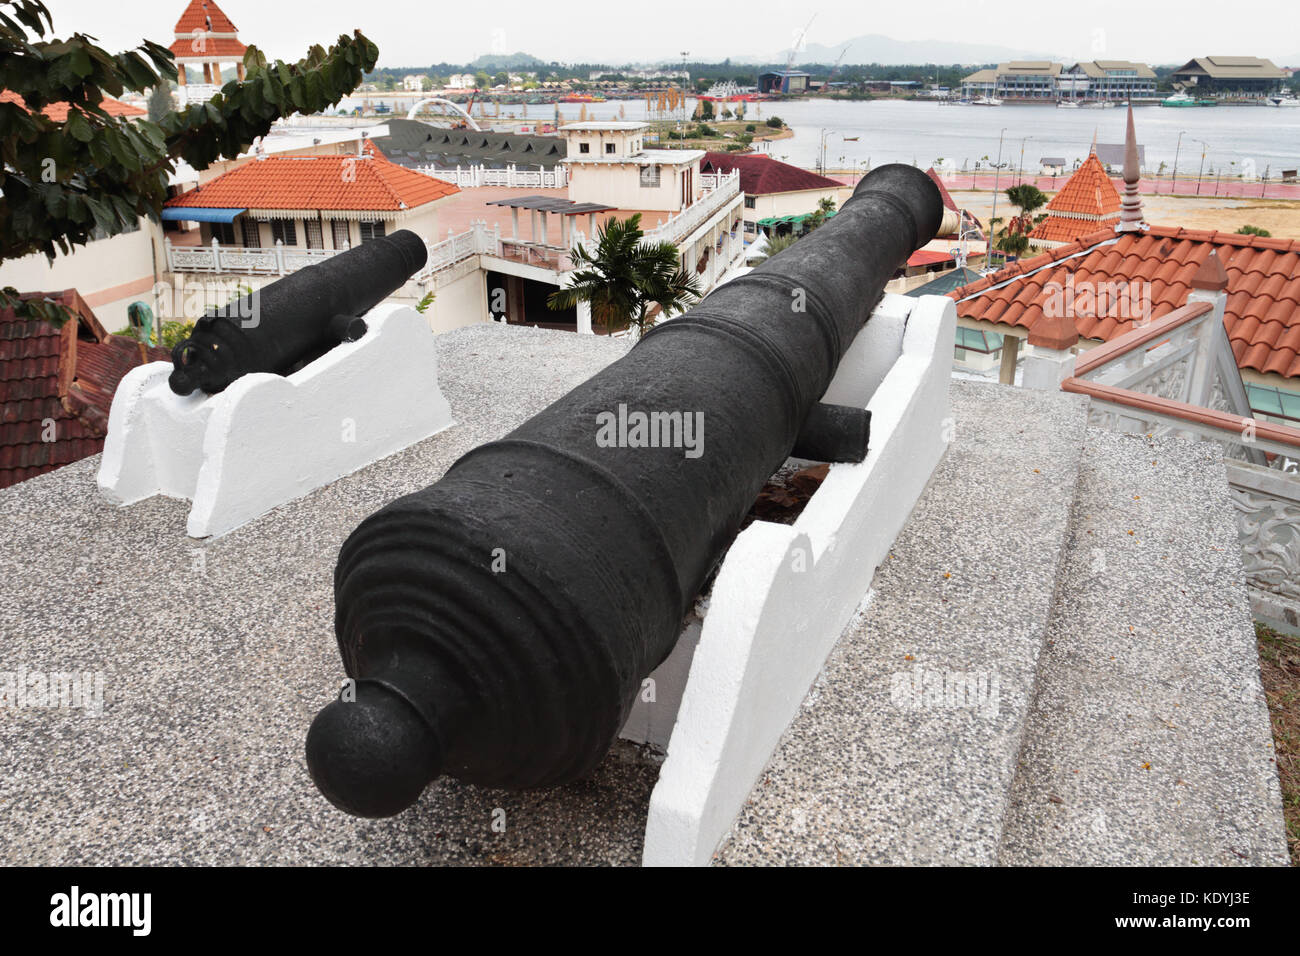 Big and small cannons at Putri Hill in Kuala Terengganu, Malaysia. The pair is locally know as the 'The Cannon that gave birth'. Stock Photo